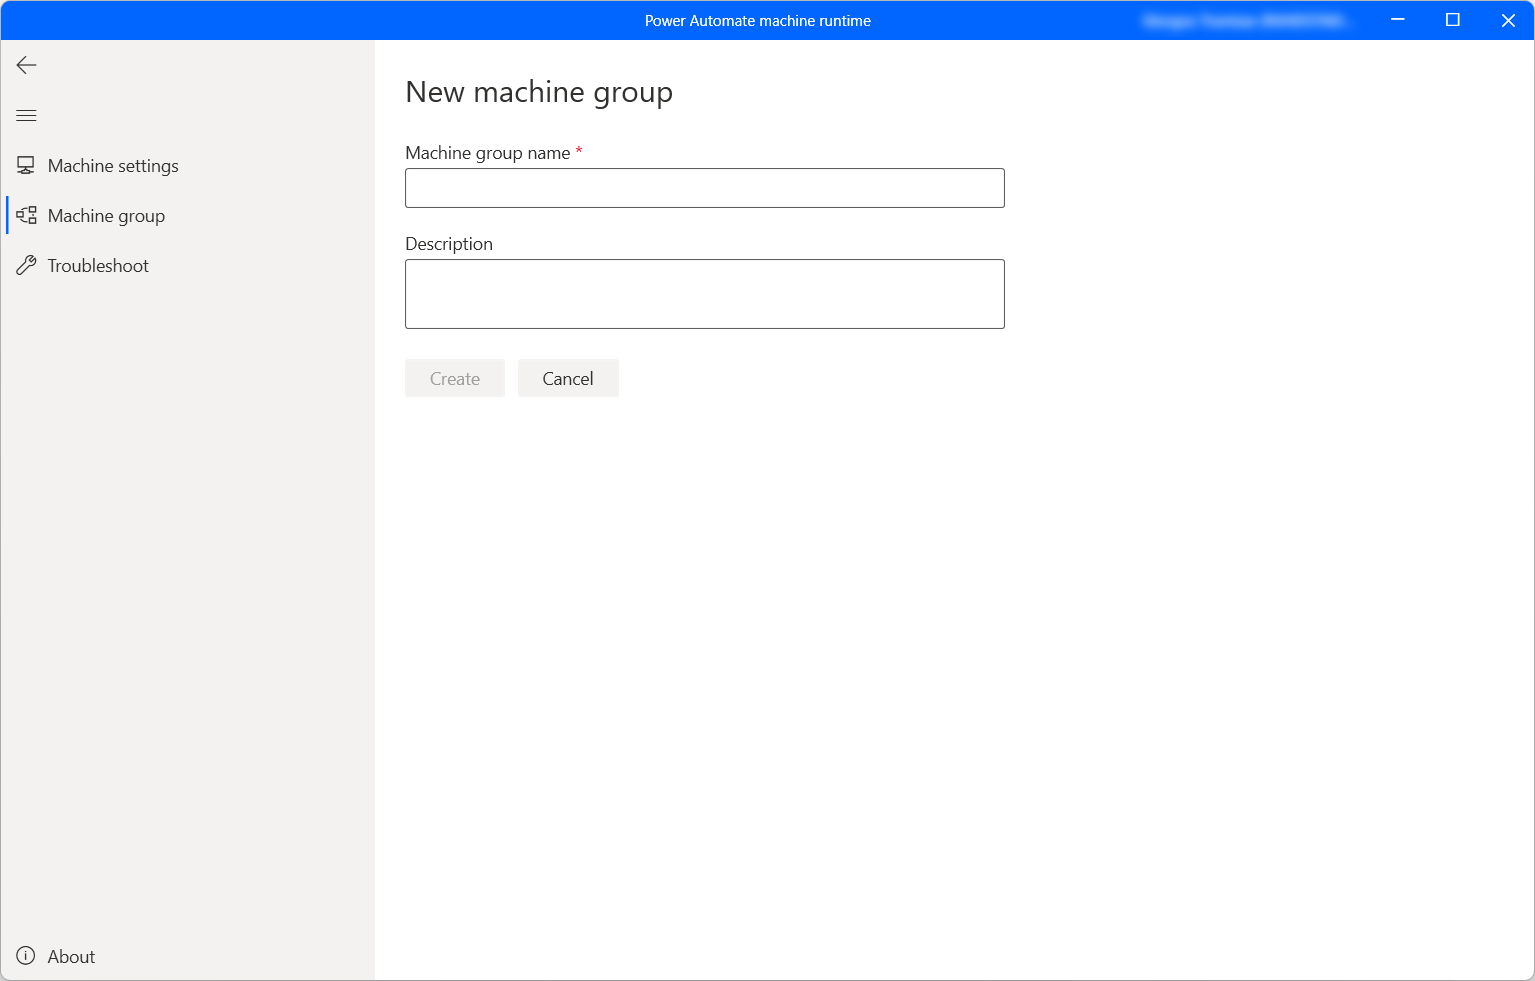 Screenshot of the dialog to create a new machine group.